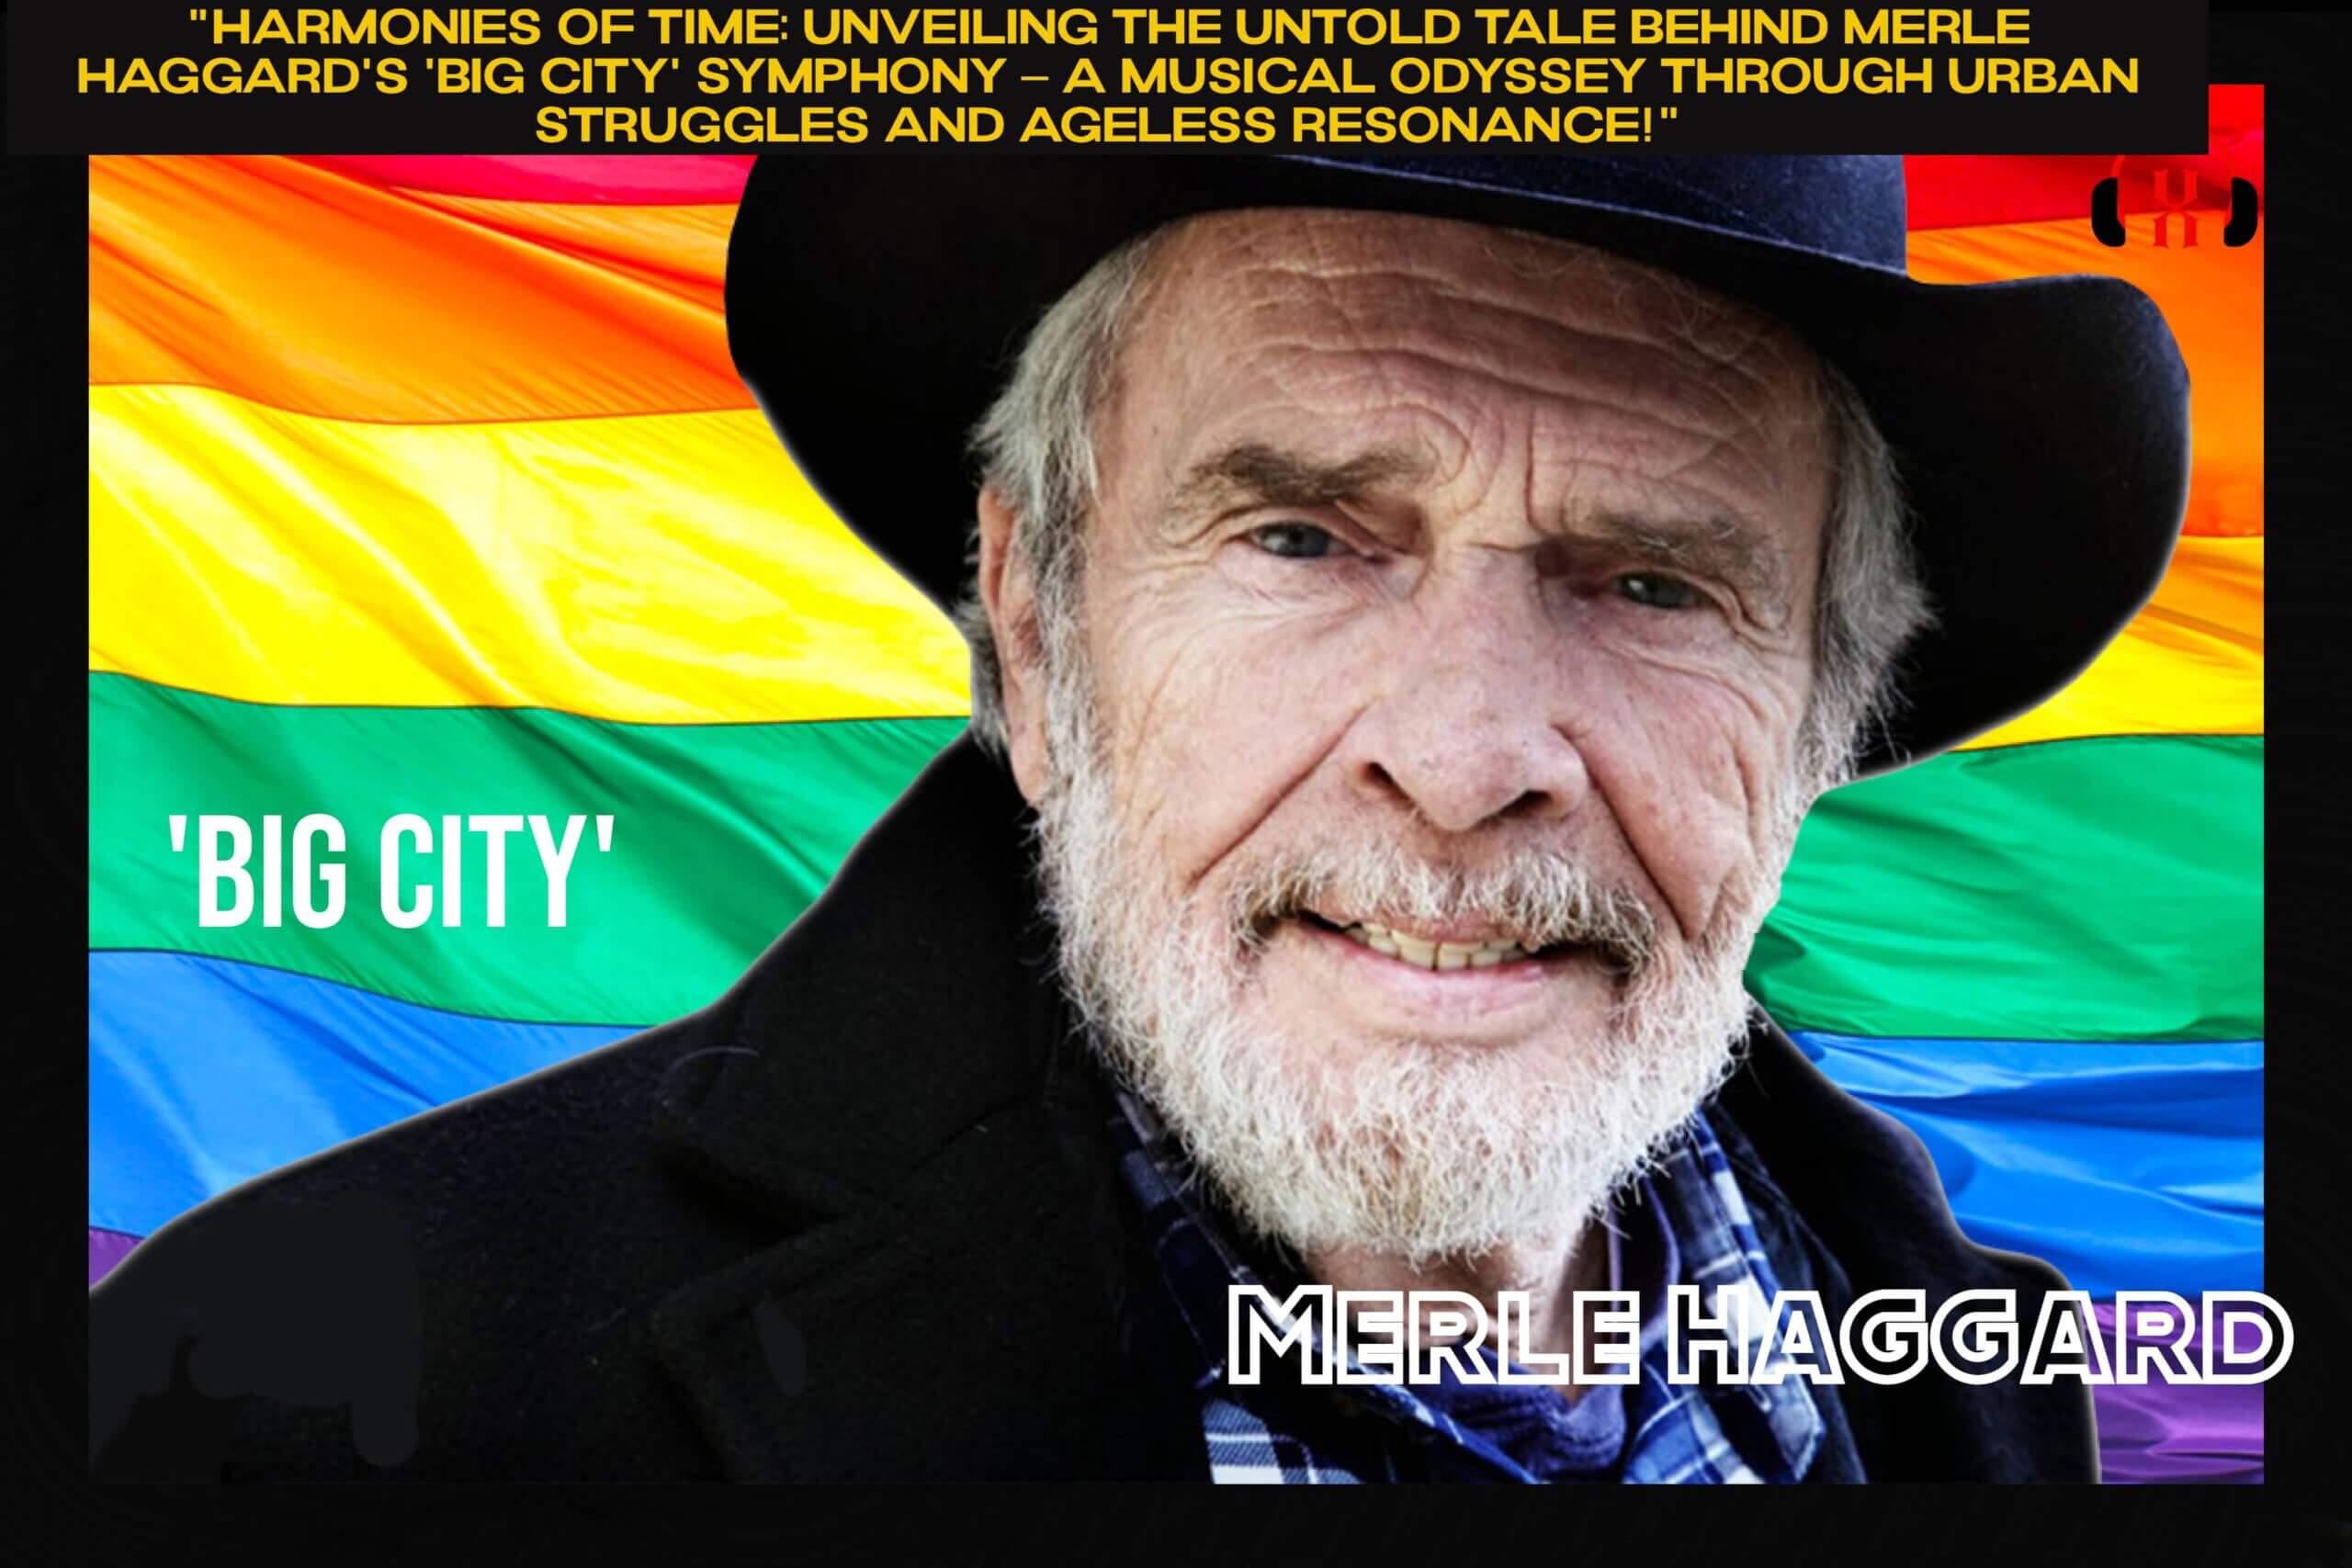 Harmonies of Time Unveiling the Untold Tale Behind Merle Haggard's 'Big City' Symphony – A Musical Odyssey Through Urban Struggles and Ageless Resonance